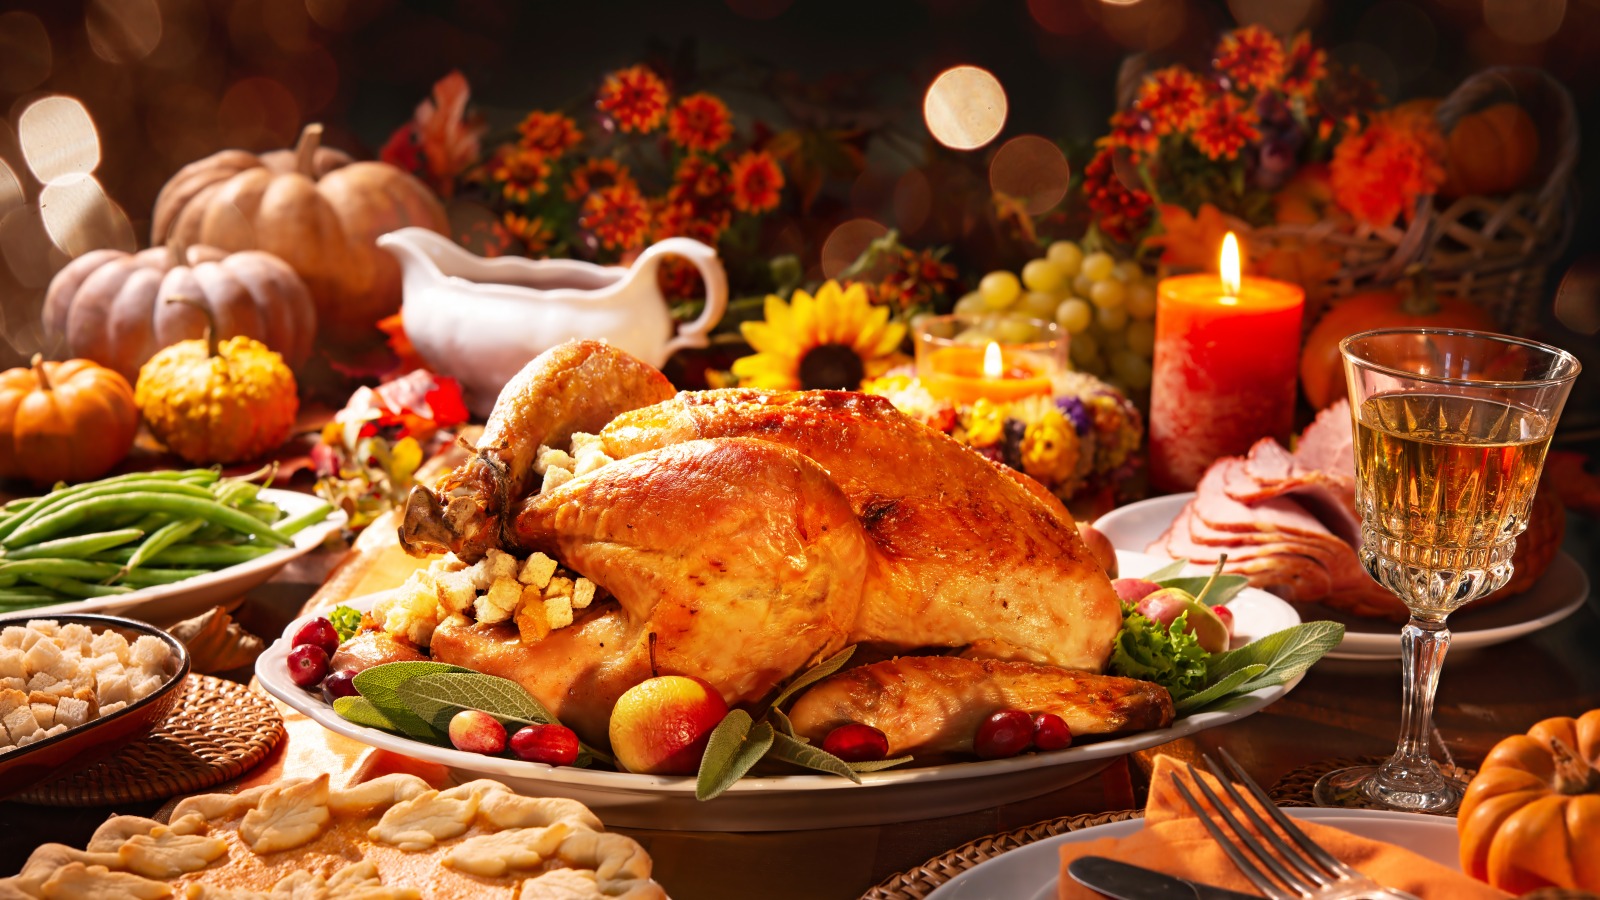 You Can Order Your Entire Thanksgiving Dinner Online From These Retailers